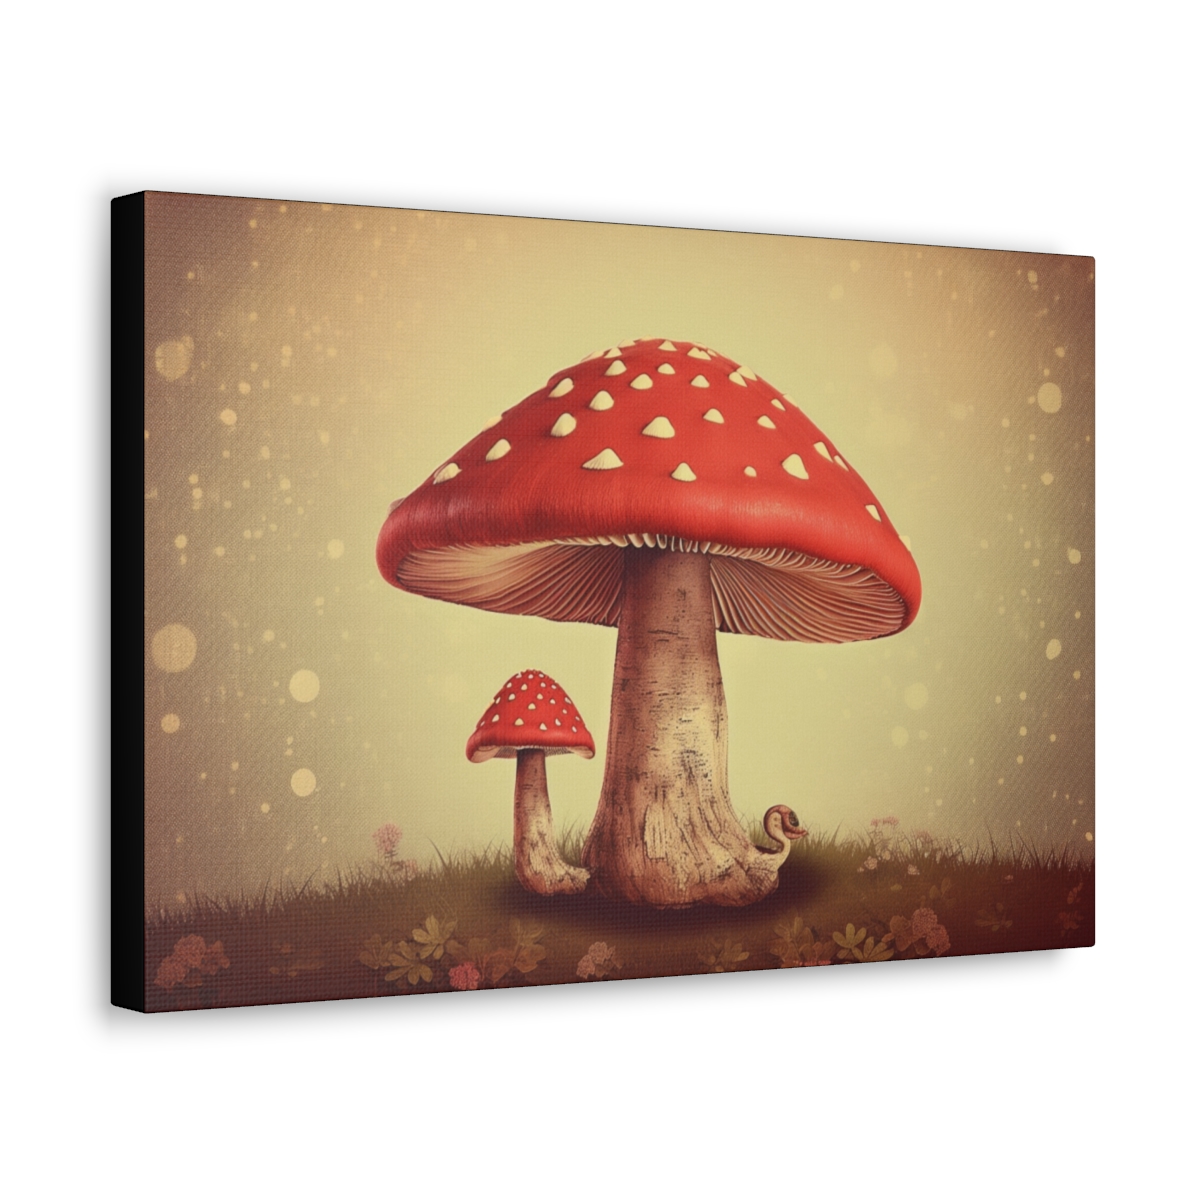 Mushroom Art Canvas Print: Shrooms From the Cottage